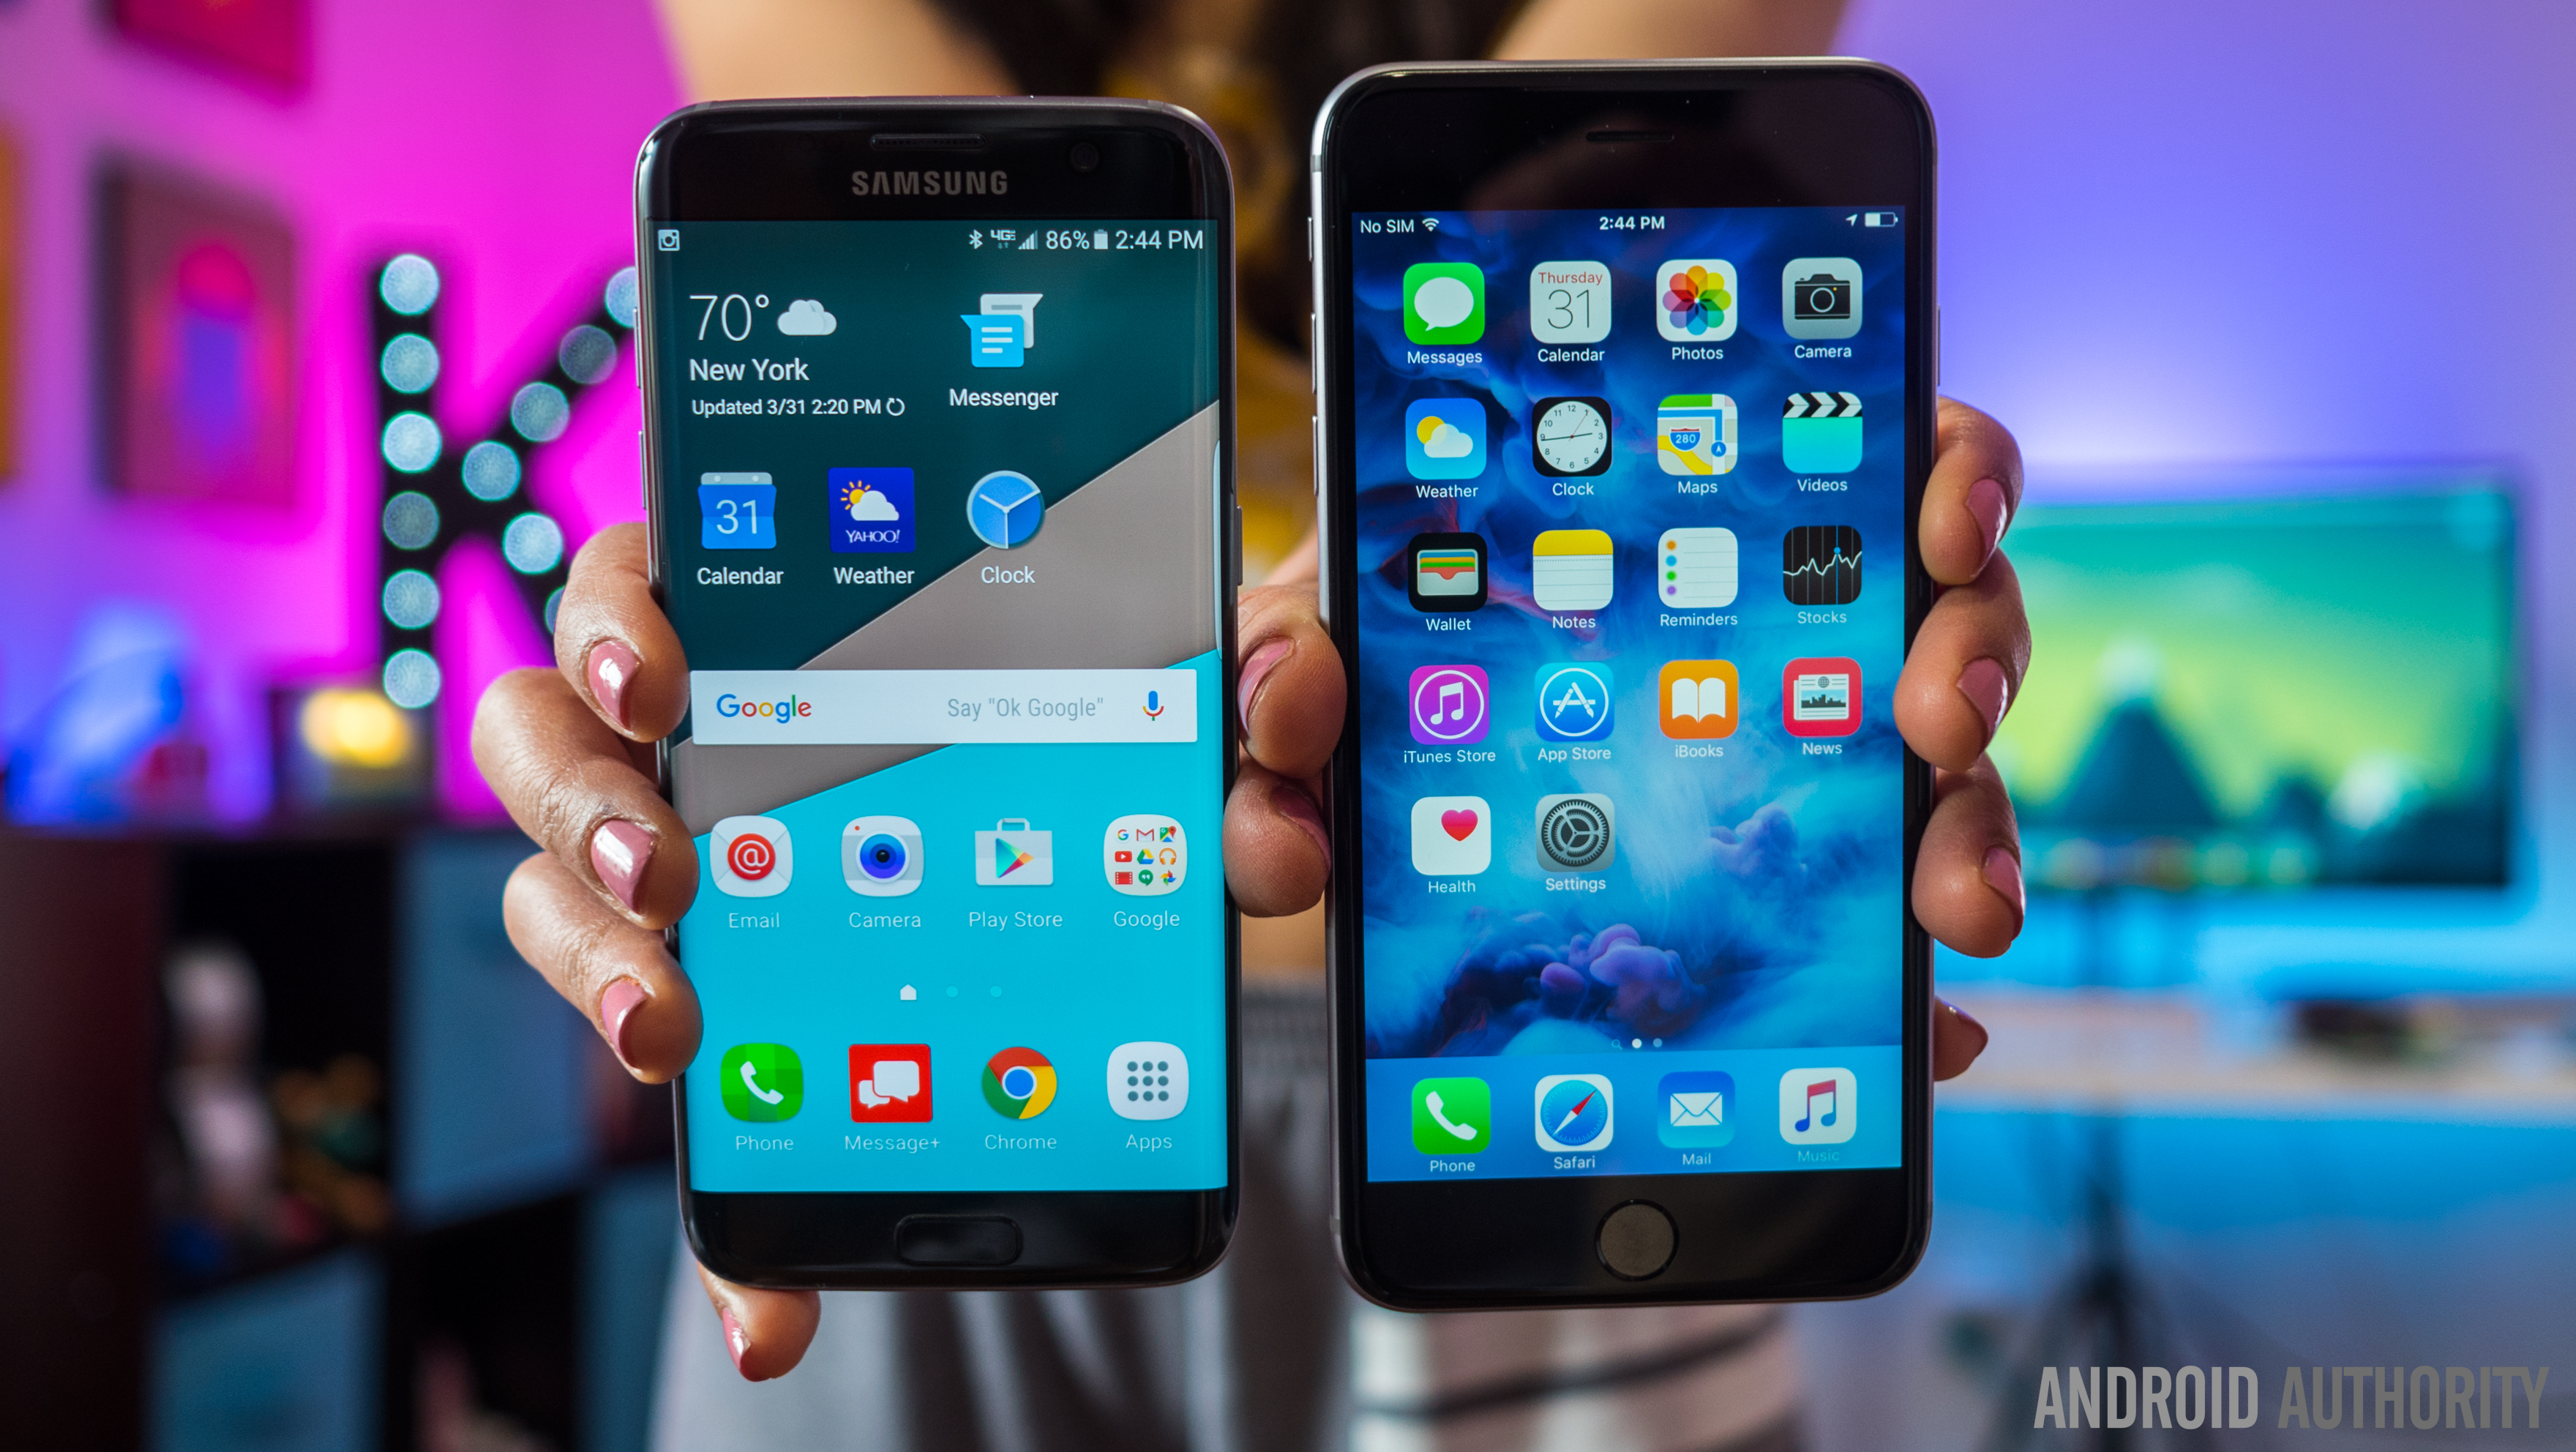 Samsung Galaxy S7 Edge Vs Iphone 6s Plus Android Authority